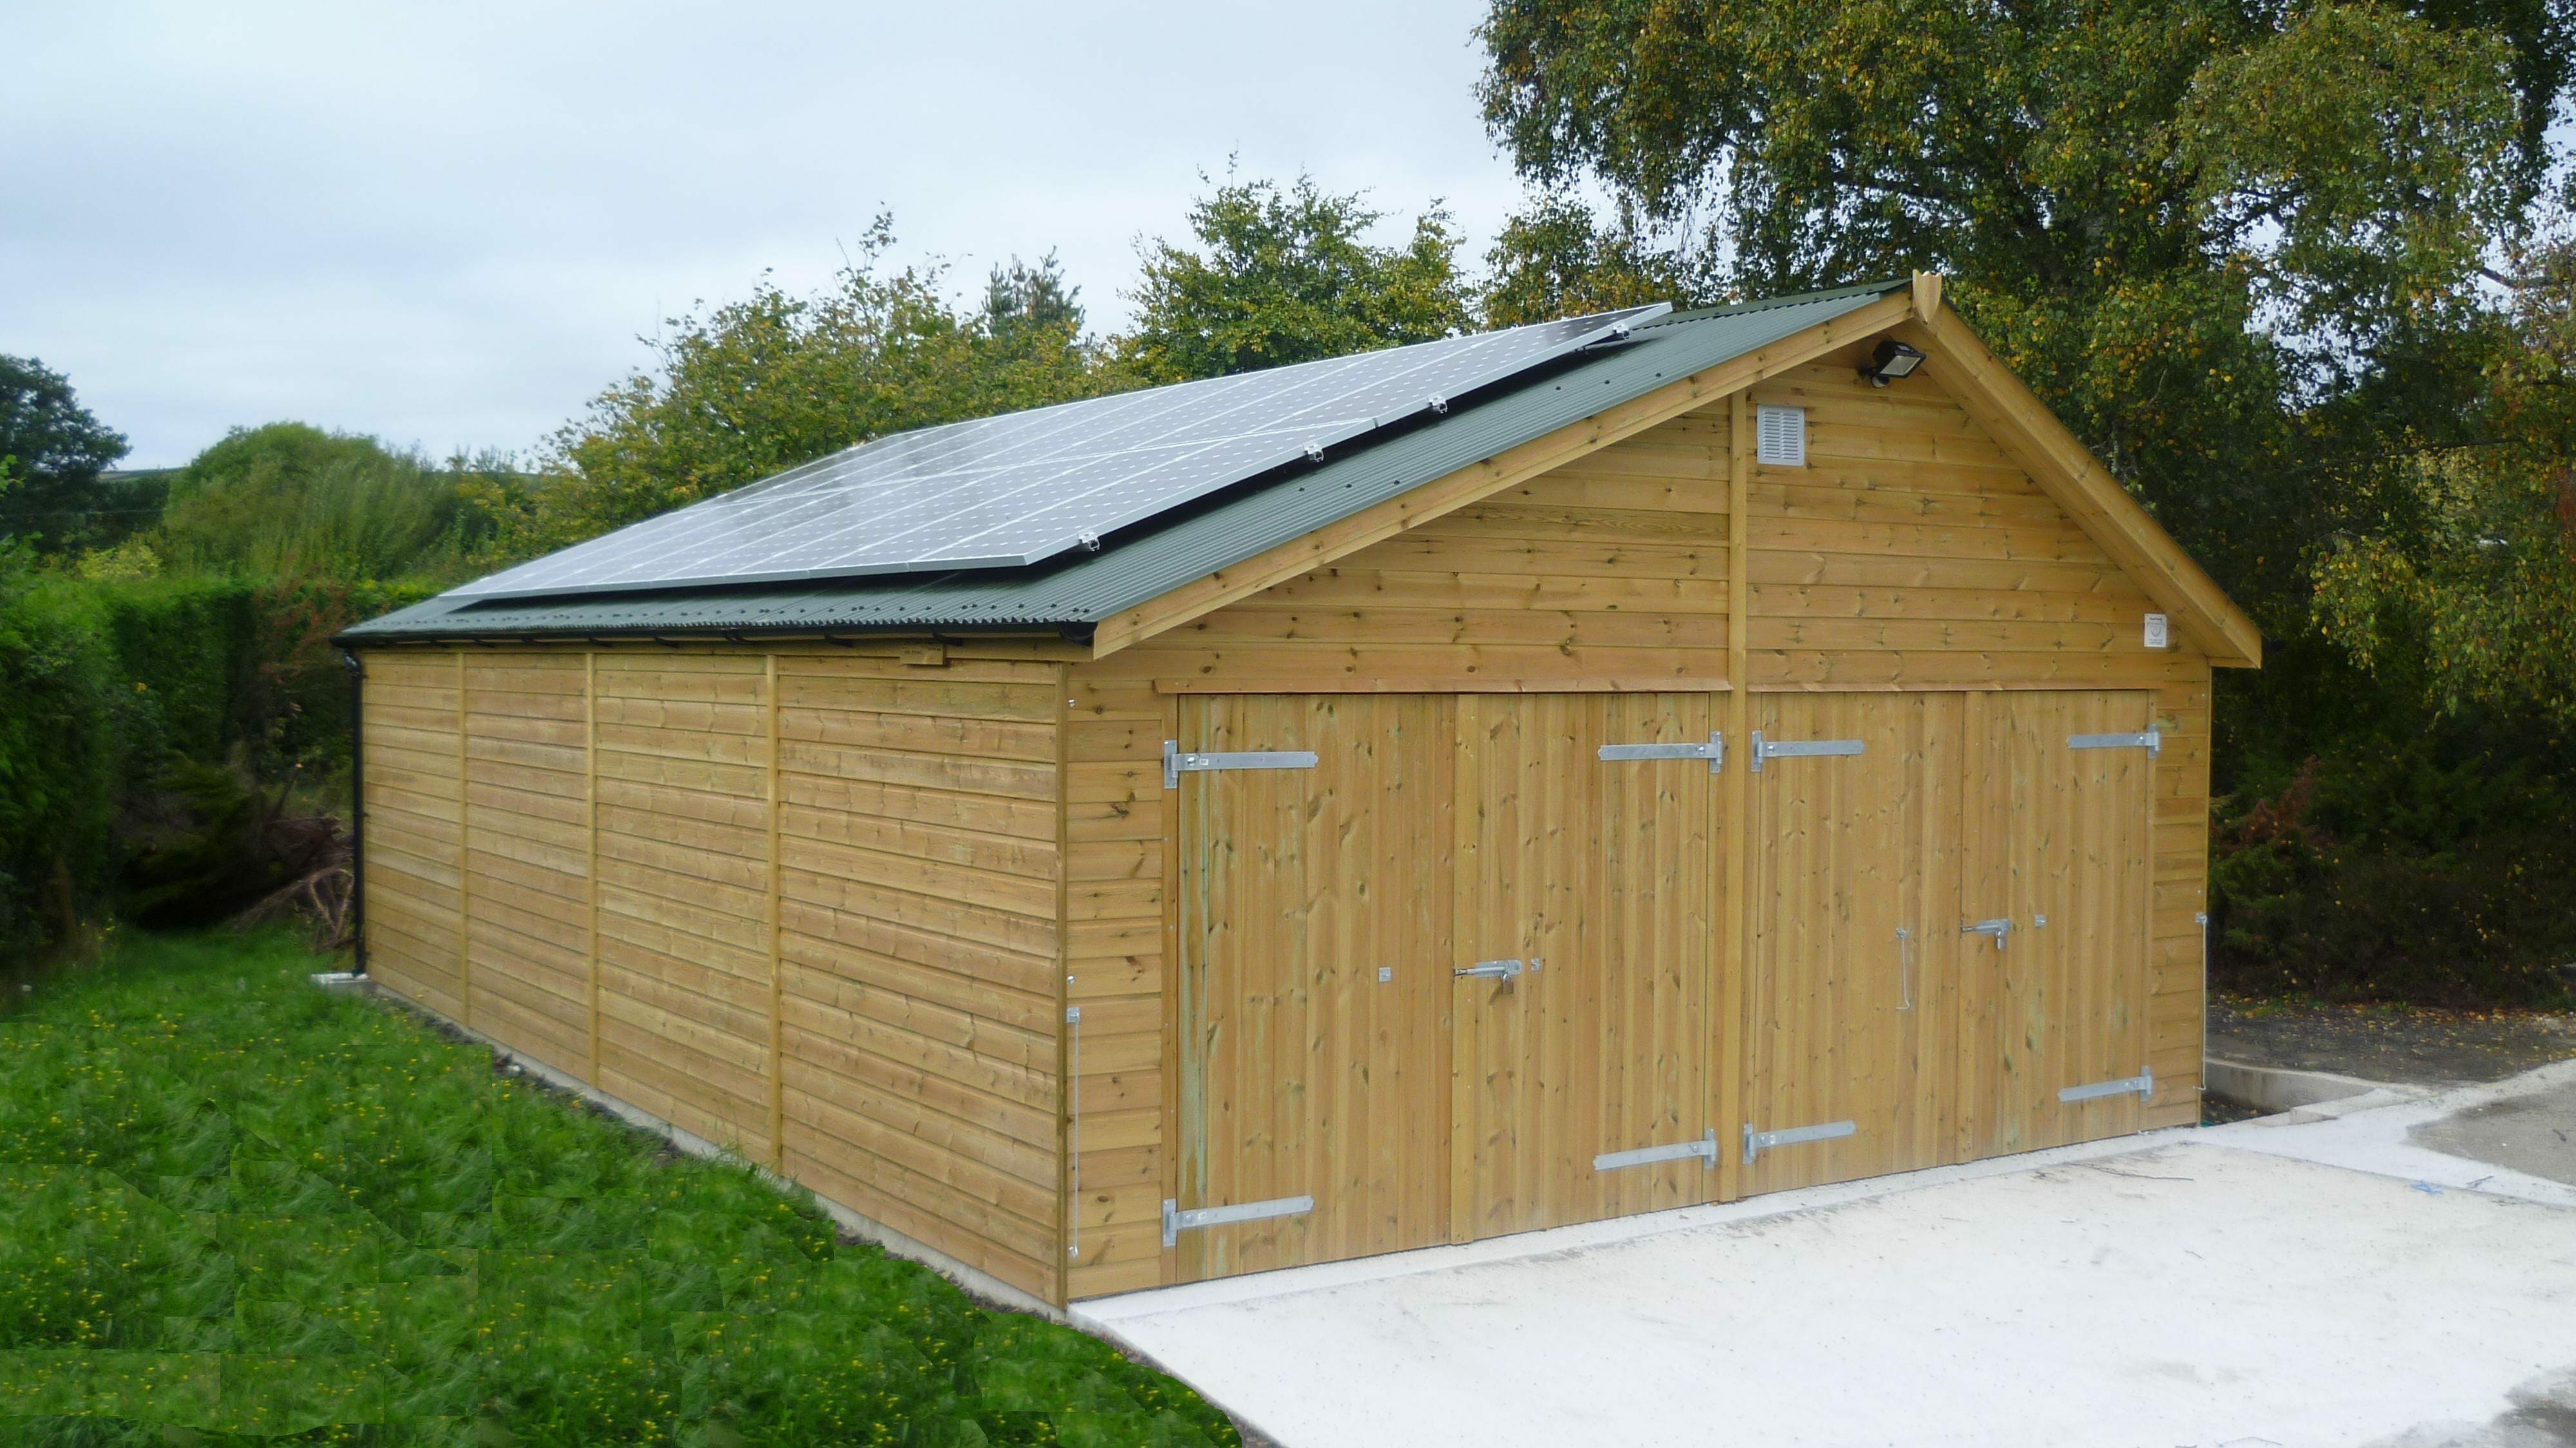 Timber clad double garage with PV roof